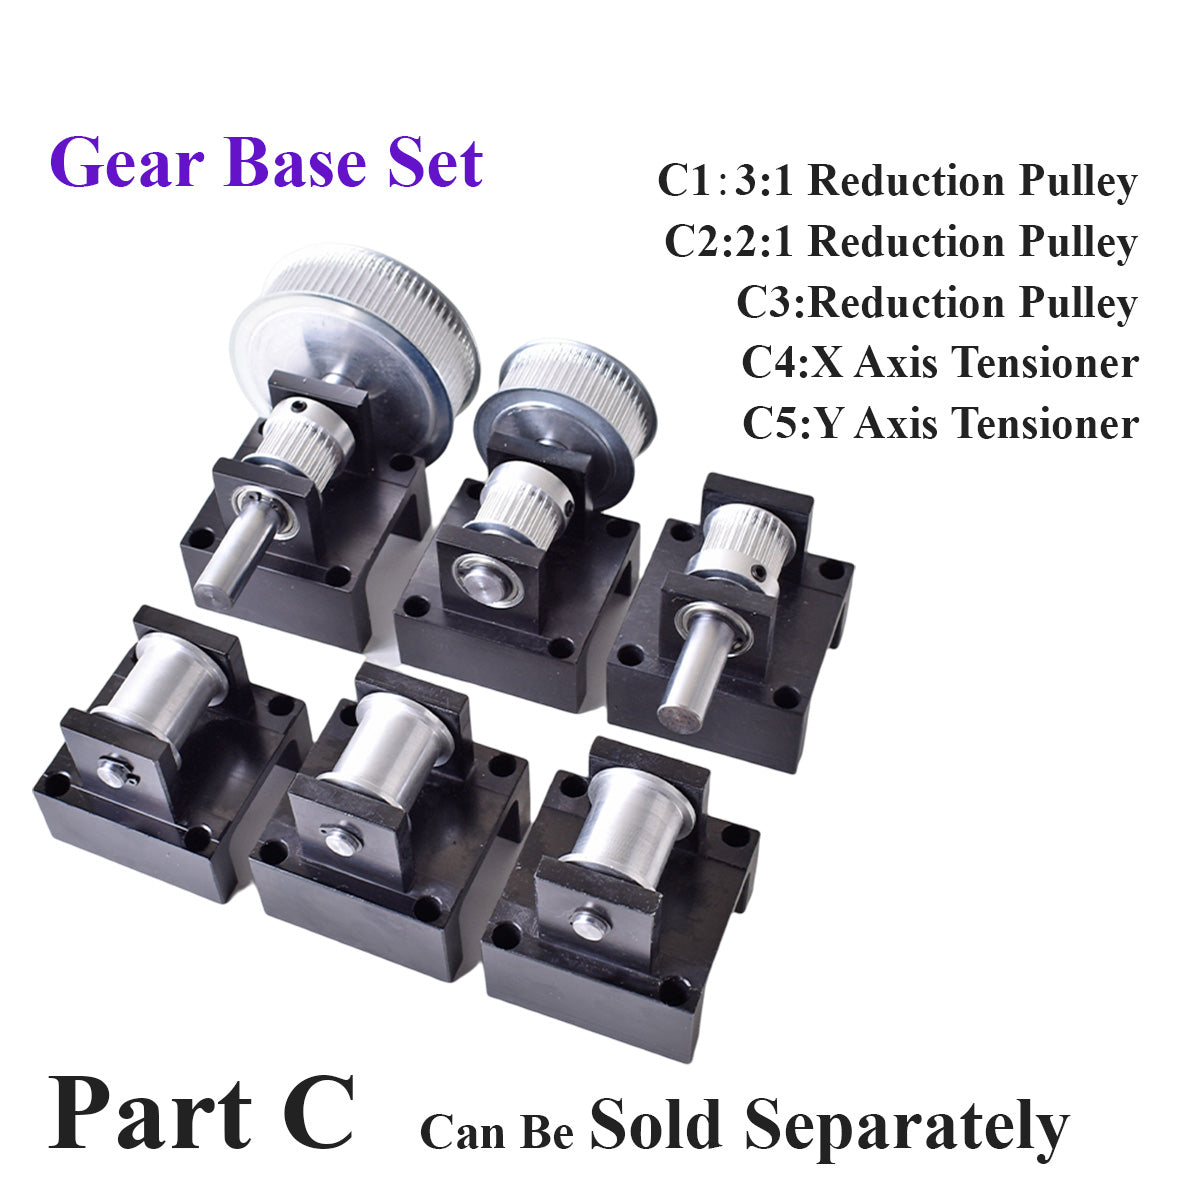 Startnow Gear Base Set: 3M Reduction Box Idler Pulley Tensioner Timing Pulley Synchronous Wheel Seat Fastener Mounting Support